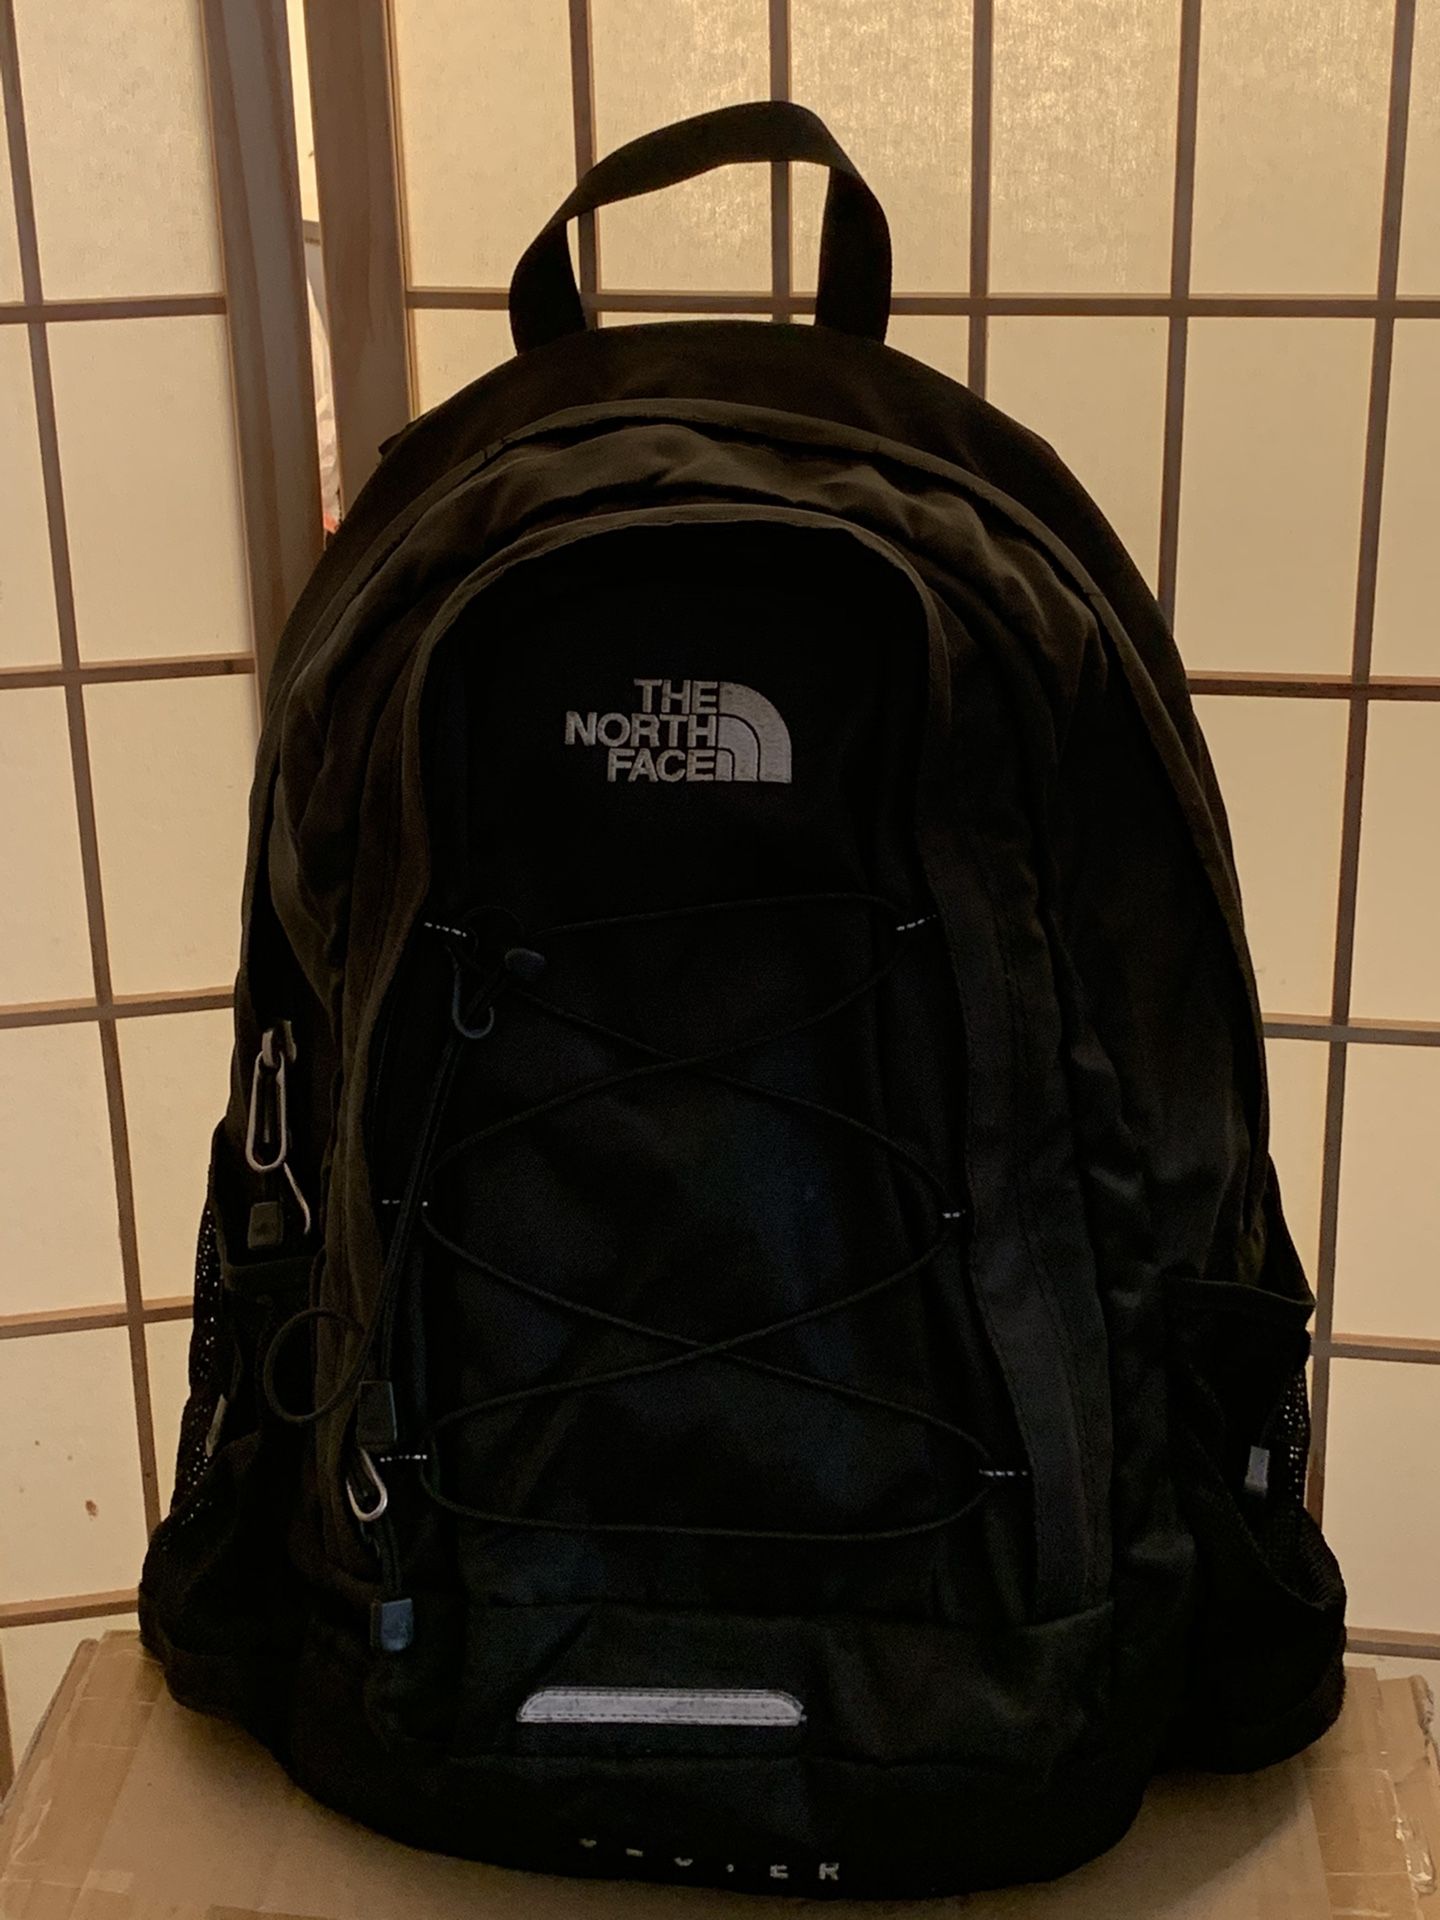 The Noth Face Backpack (black)